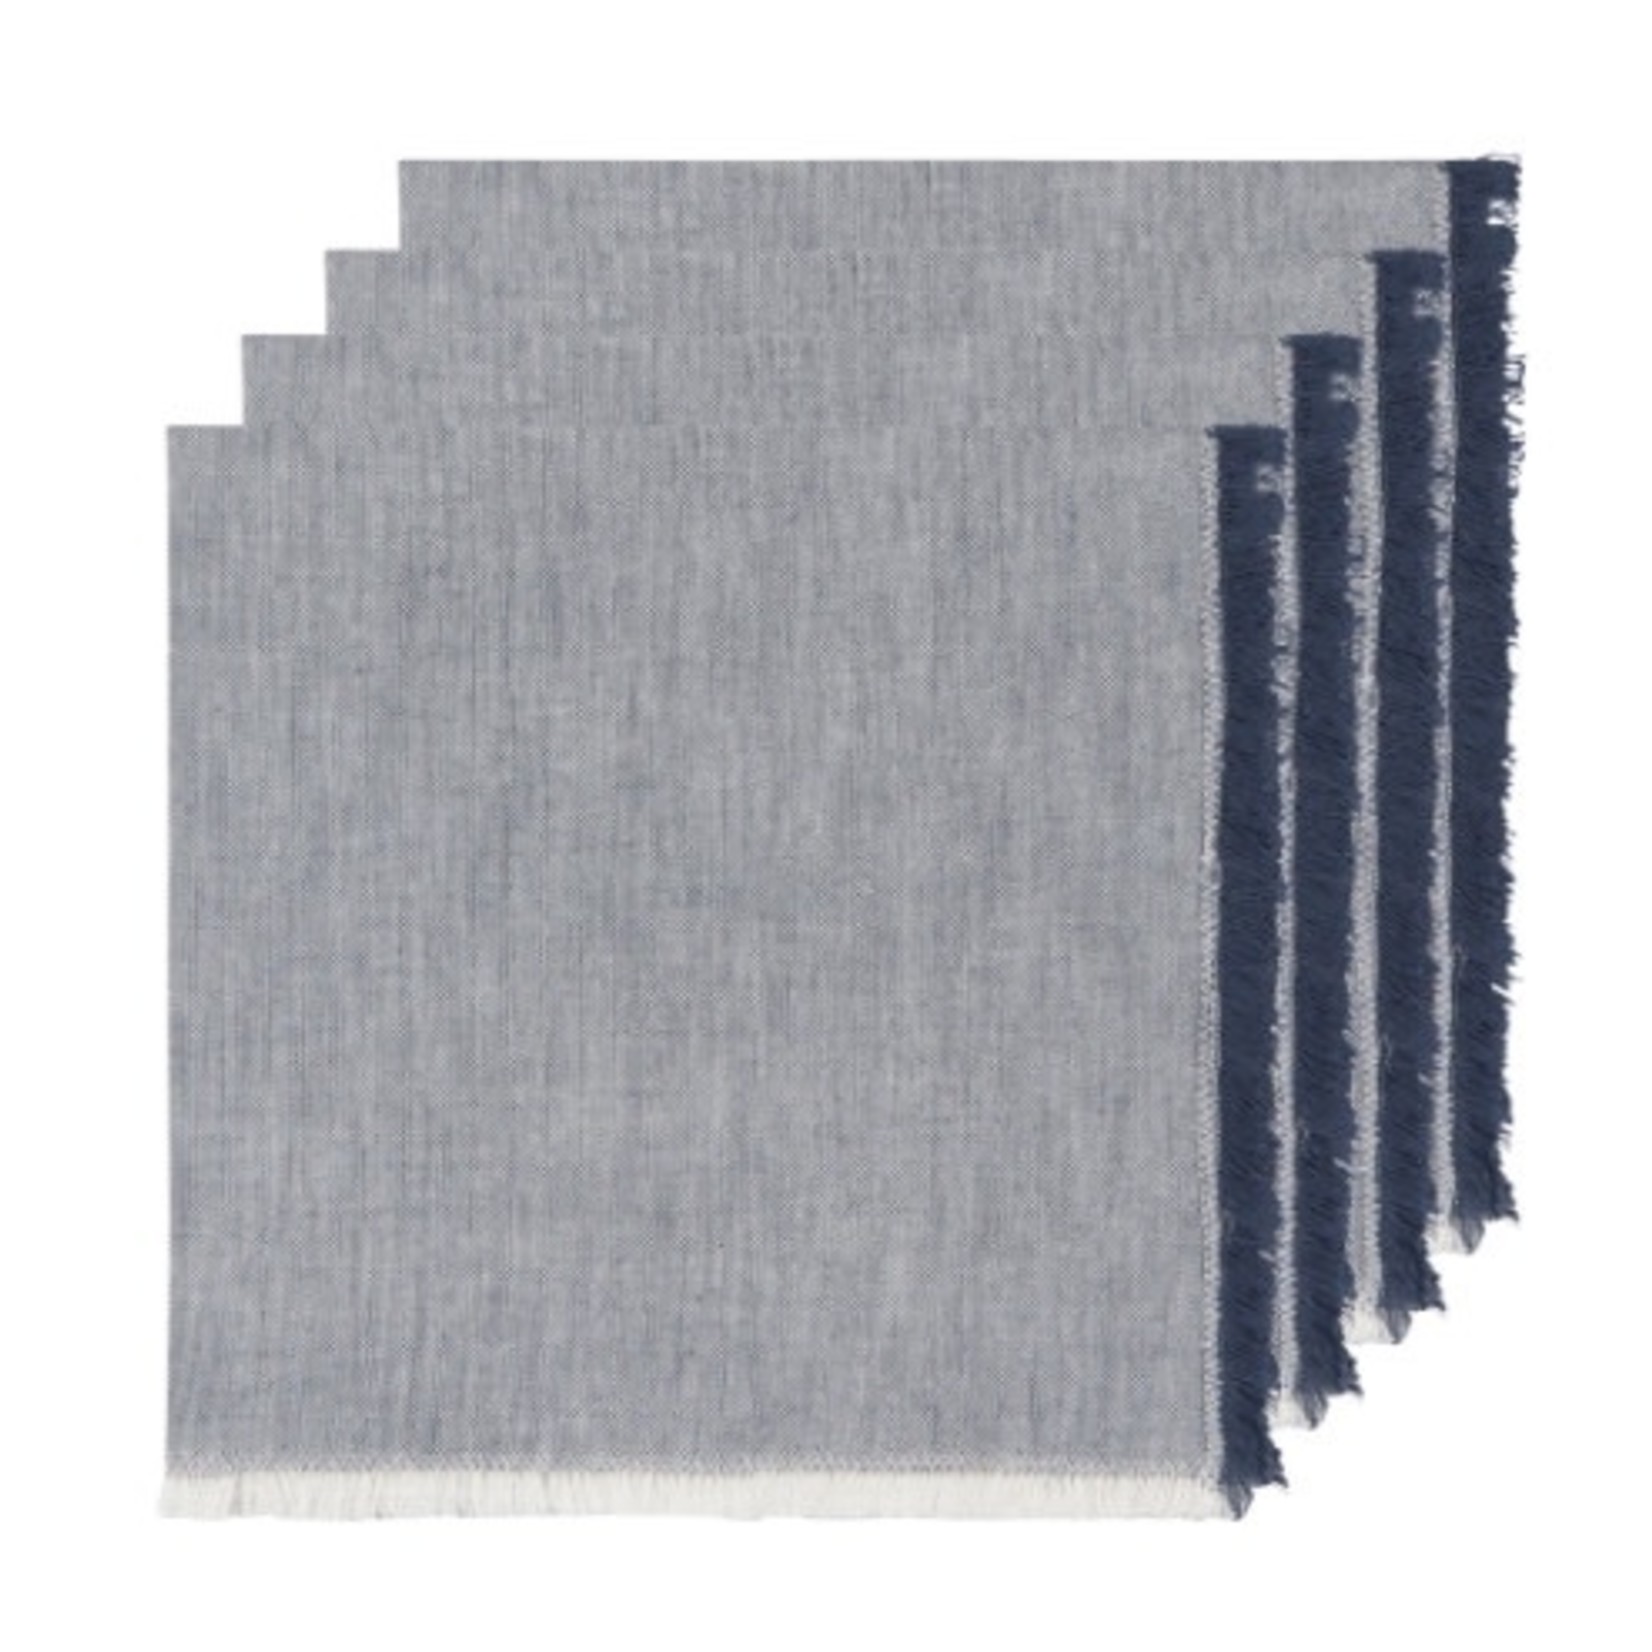 HEIRLOOM By Danica HEIRLOOM Chambray Cloth Napkins S/4 - Midnight